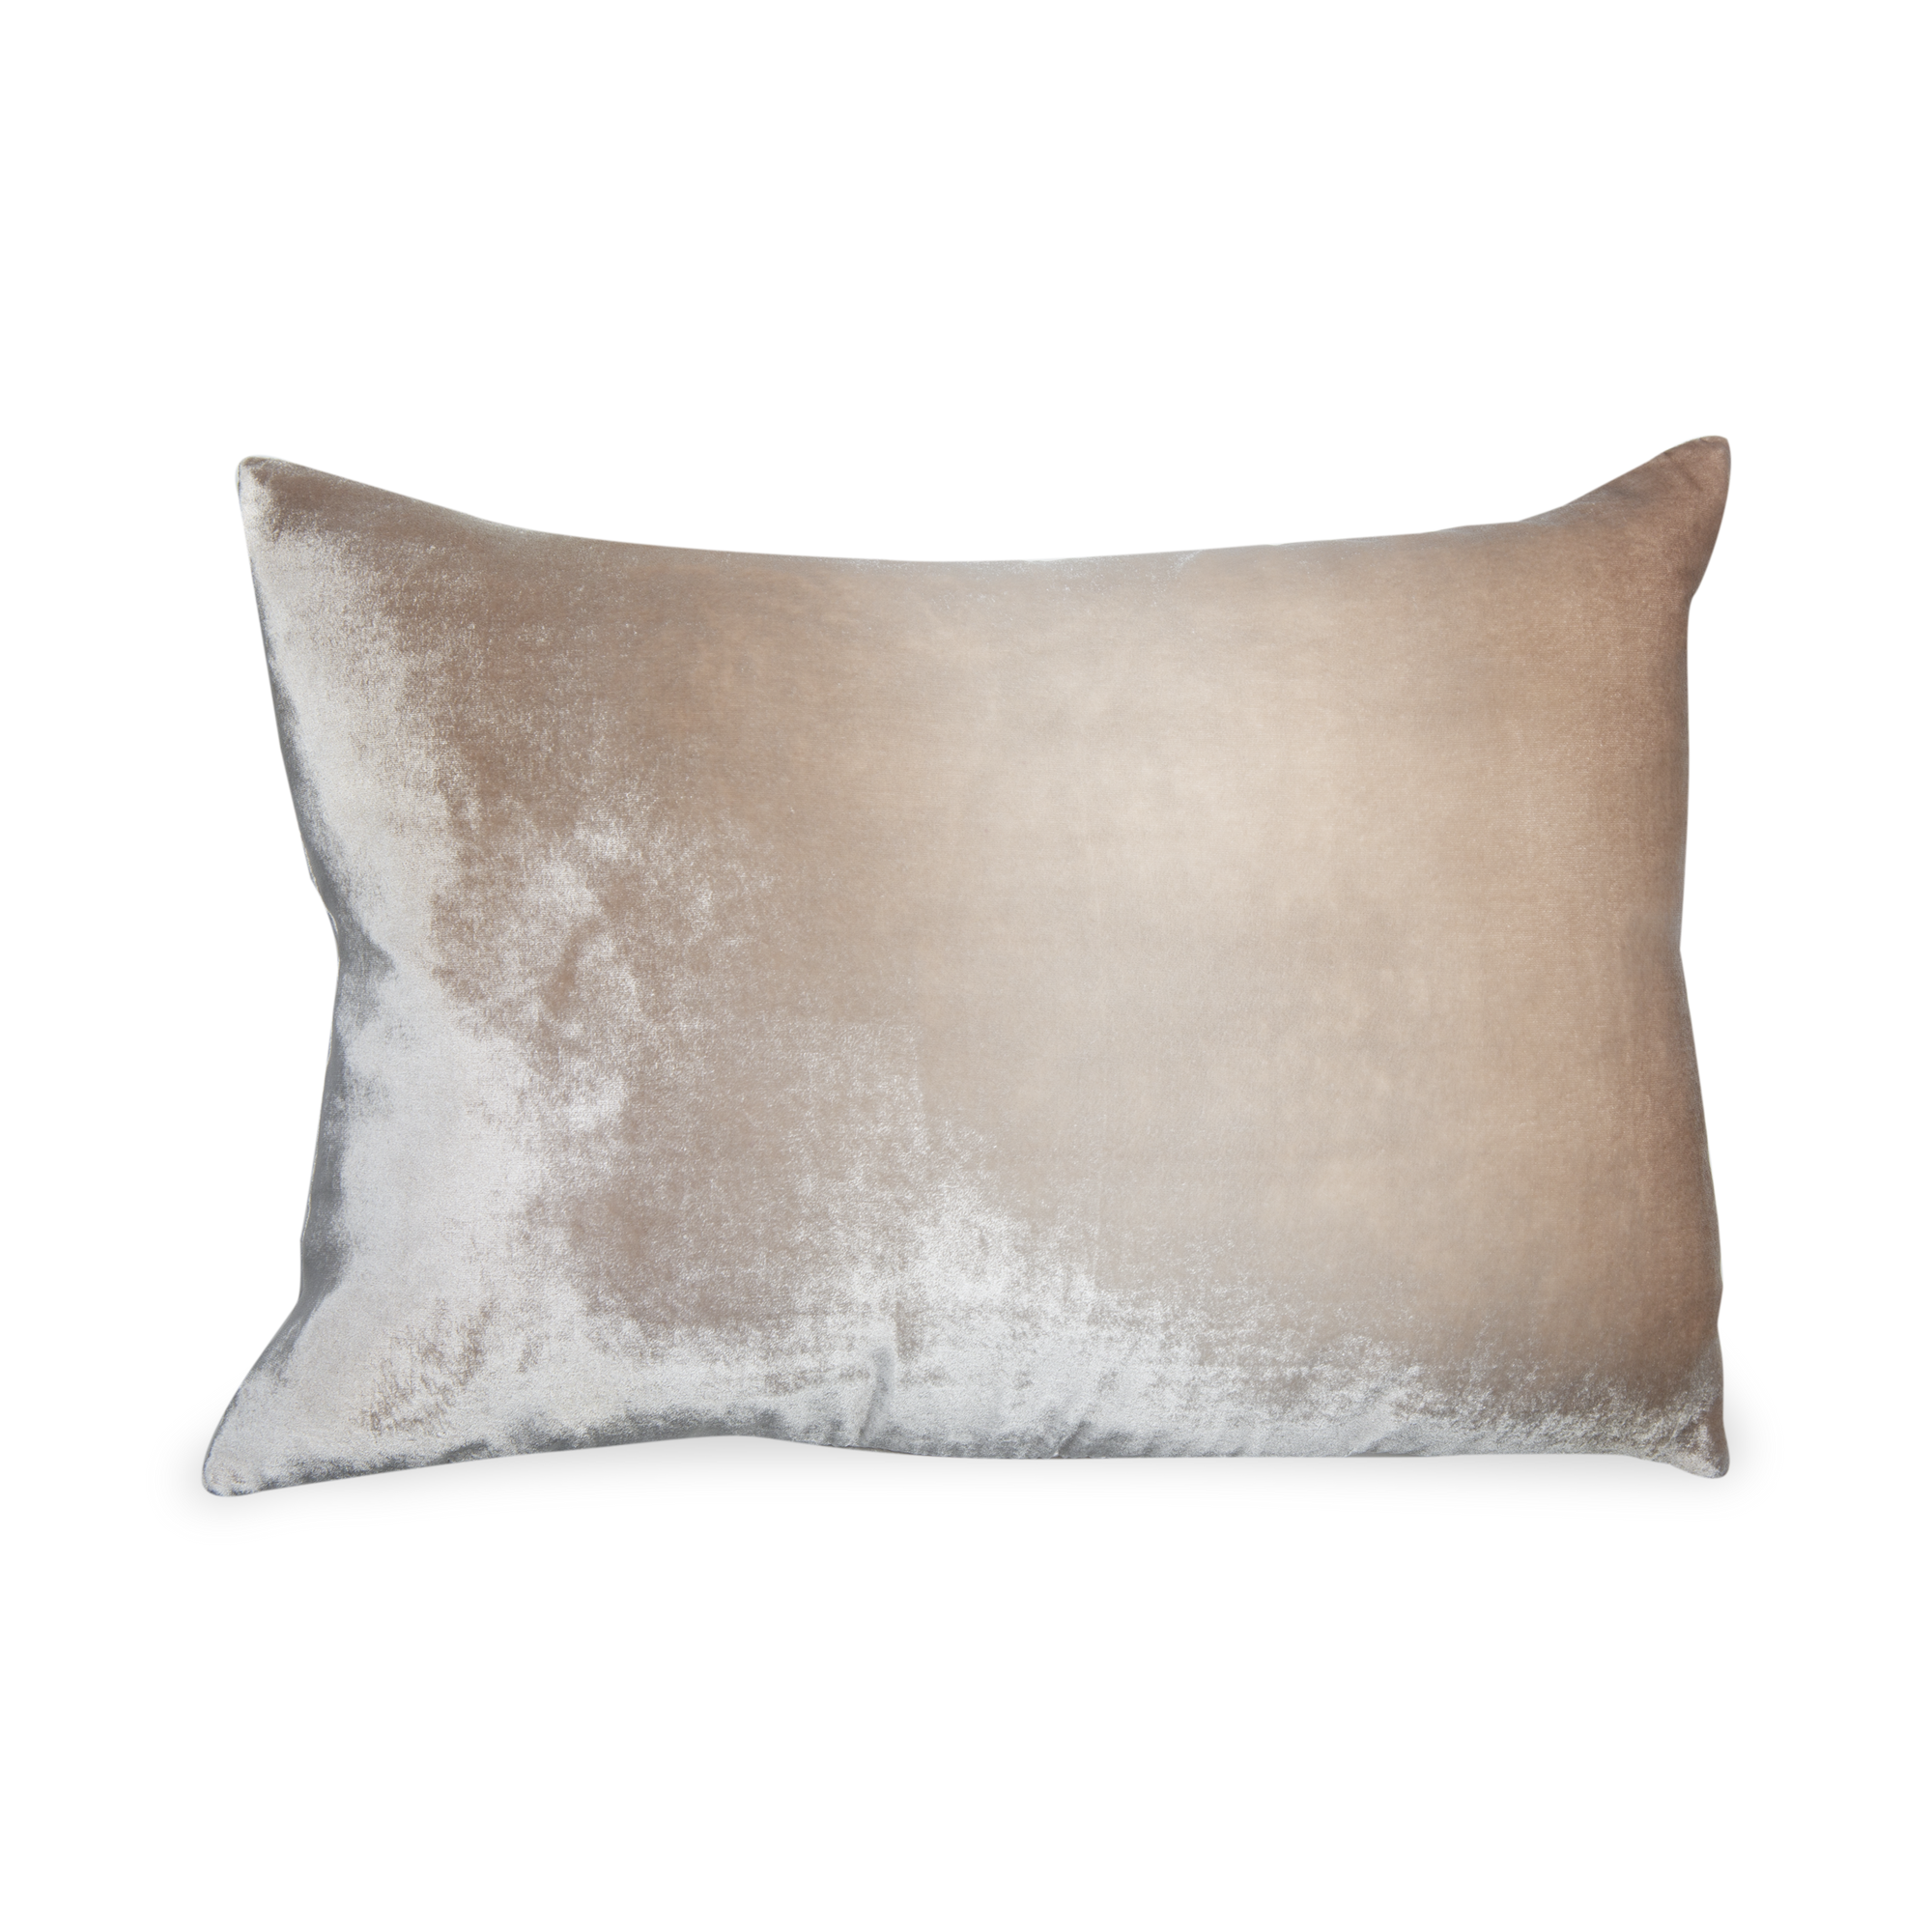 The hand-dyed Velvet Ombre Pillow is composed of striking hues.